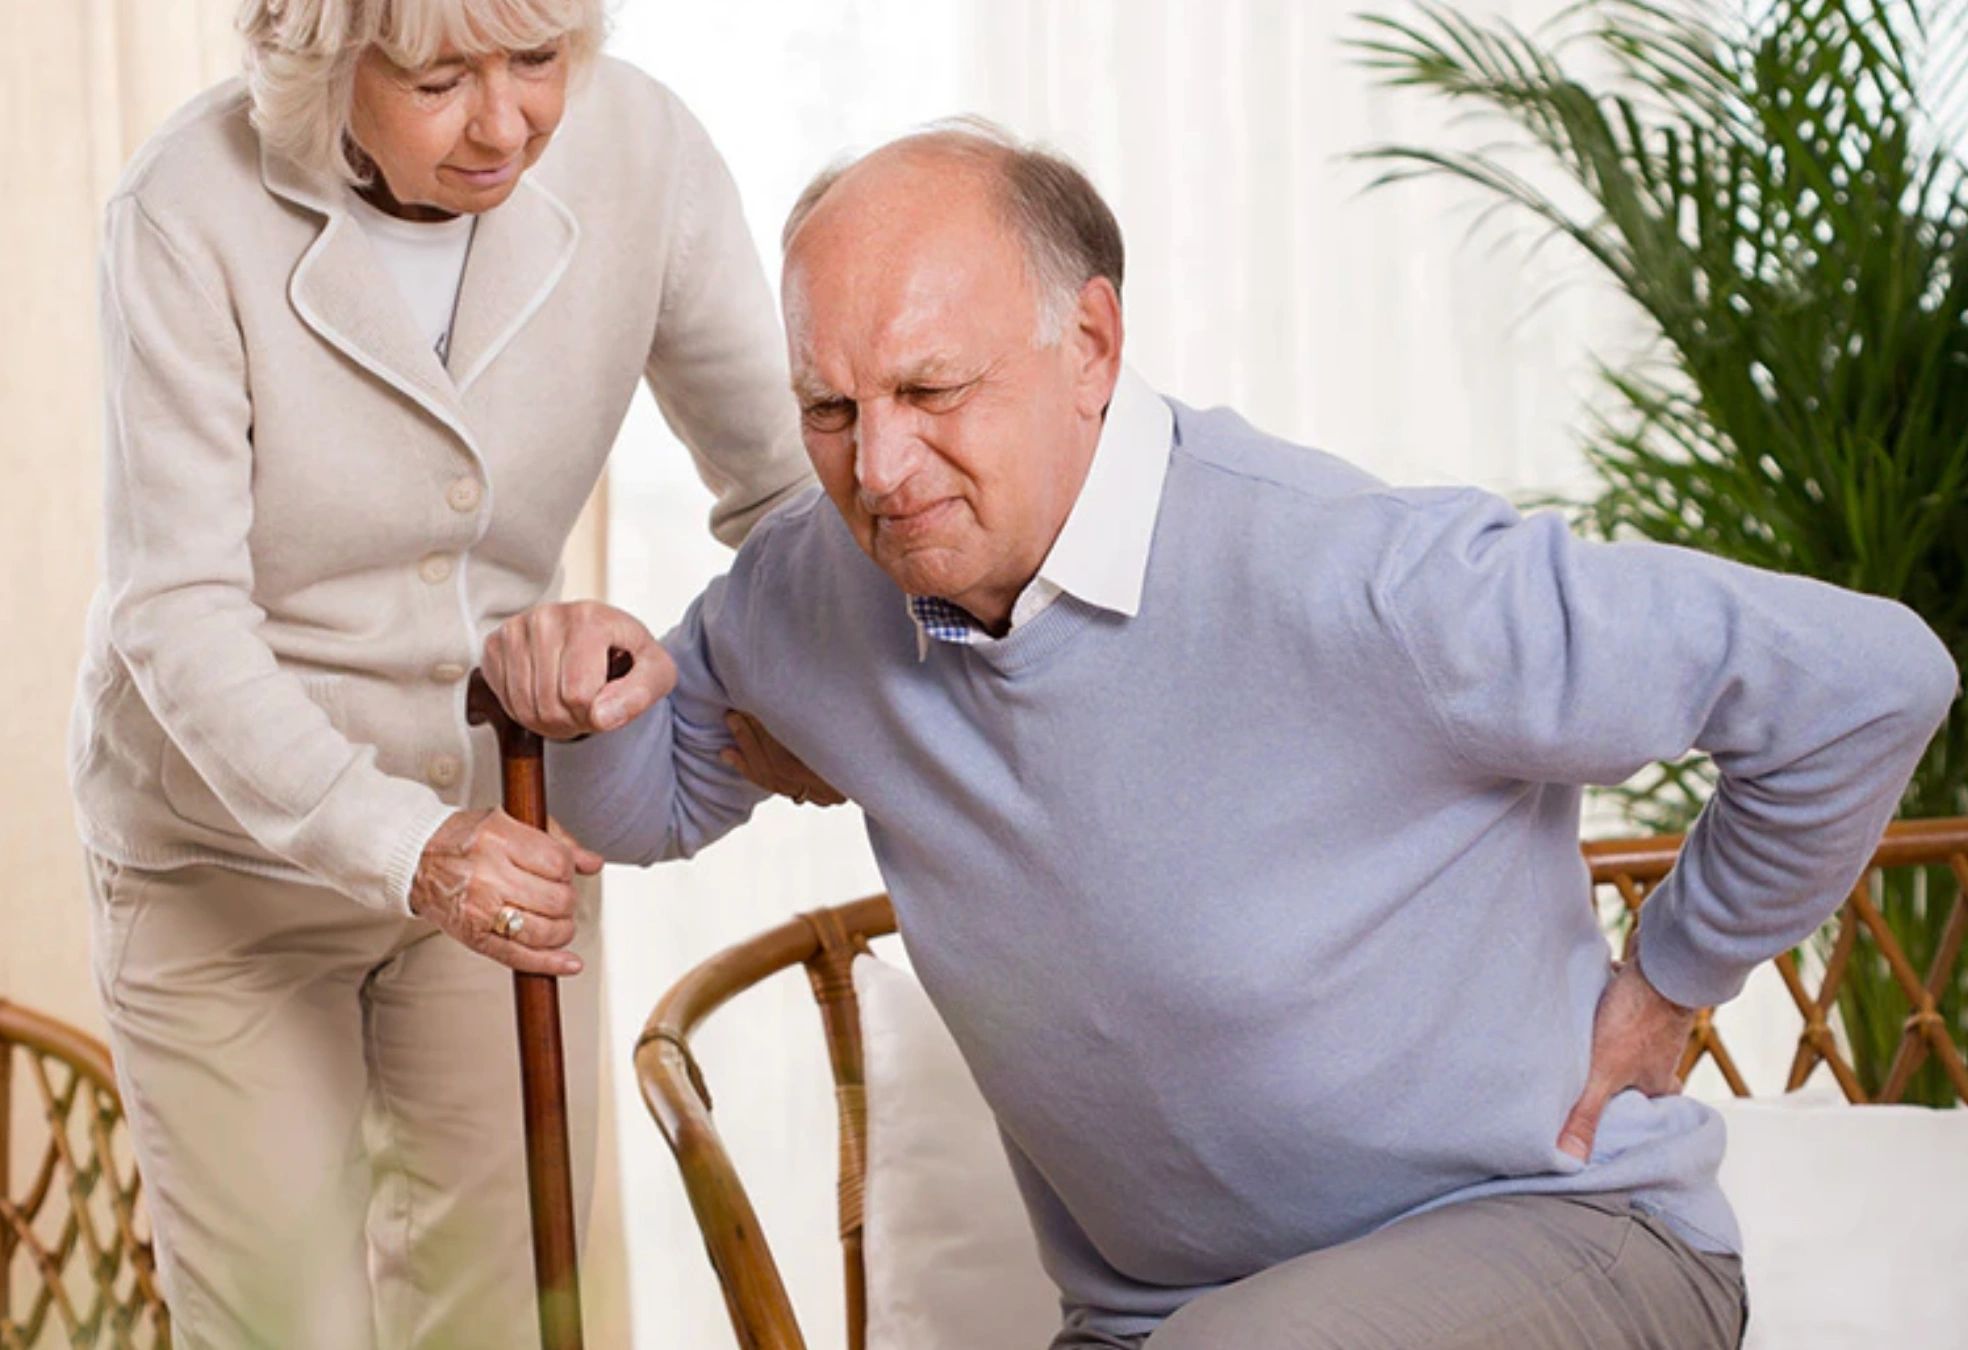 Osteopathy treatment for back and nect pain